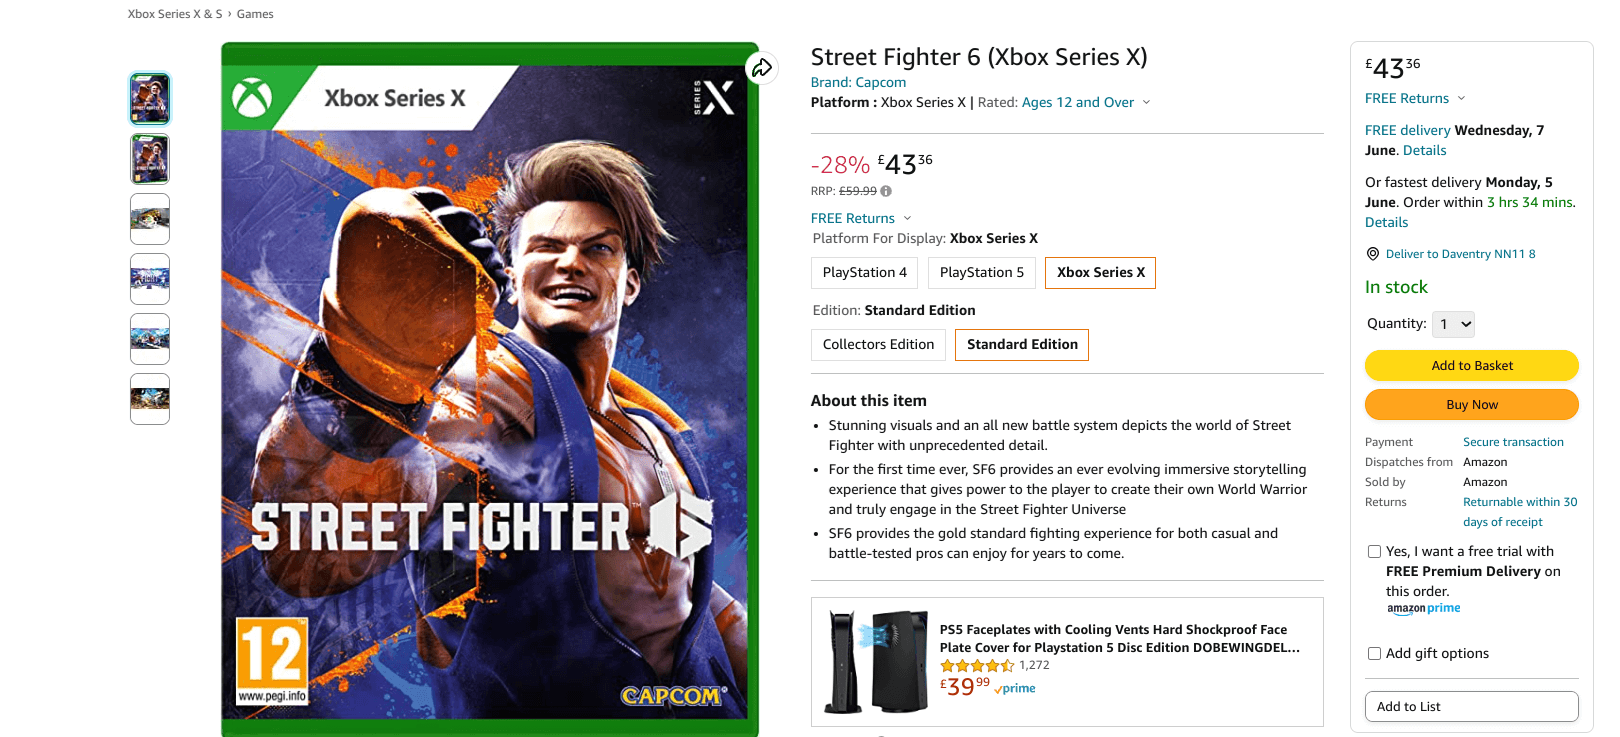 Street Fighter Discounted to £43.36 on Amazon UK for the Xbox Series Consoles